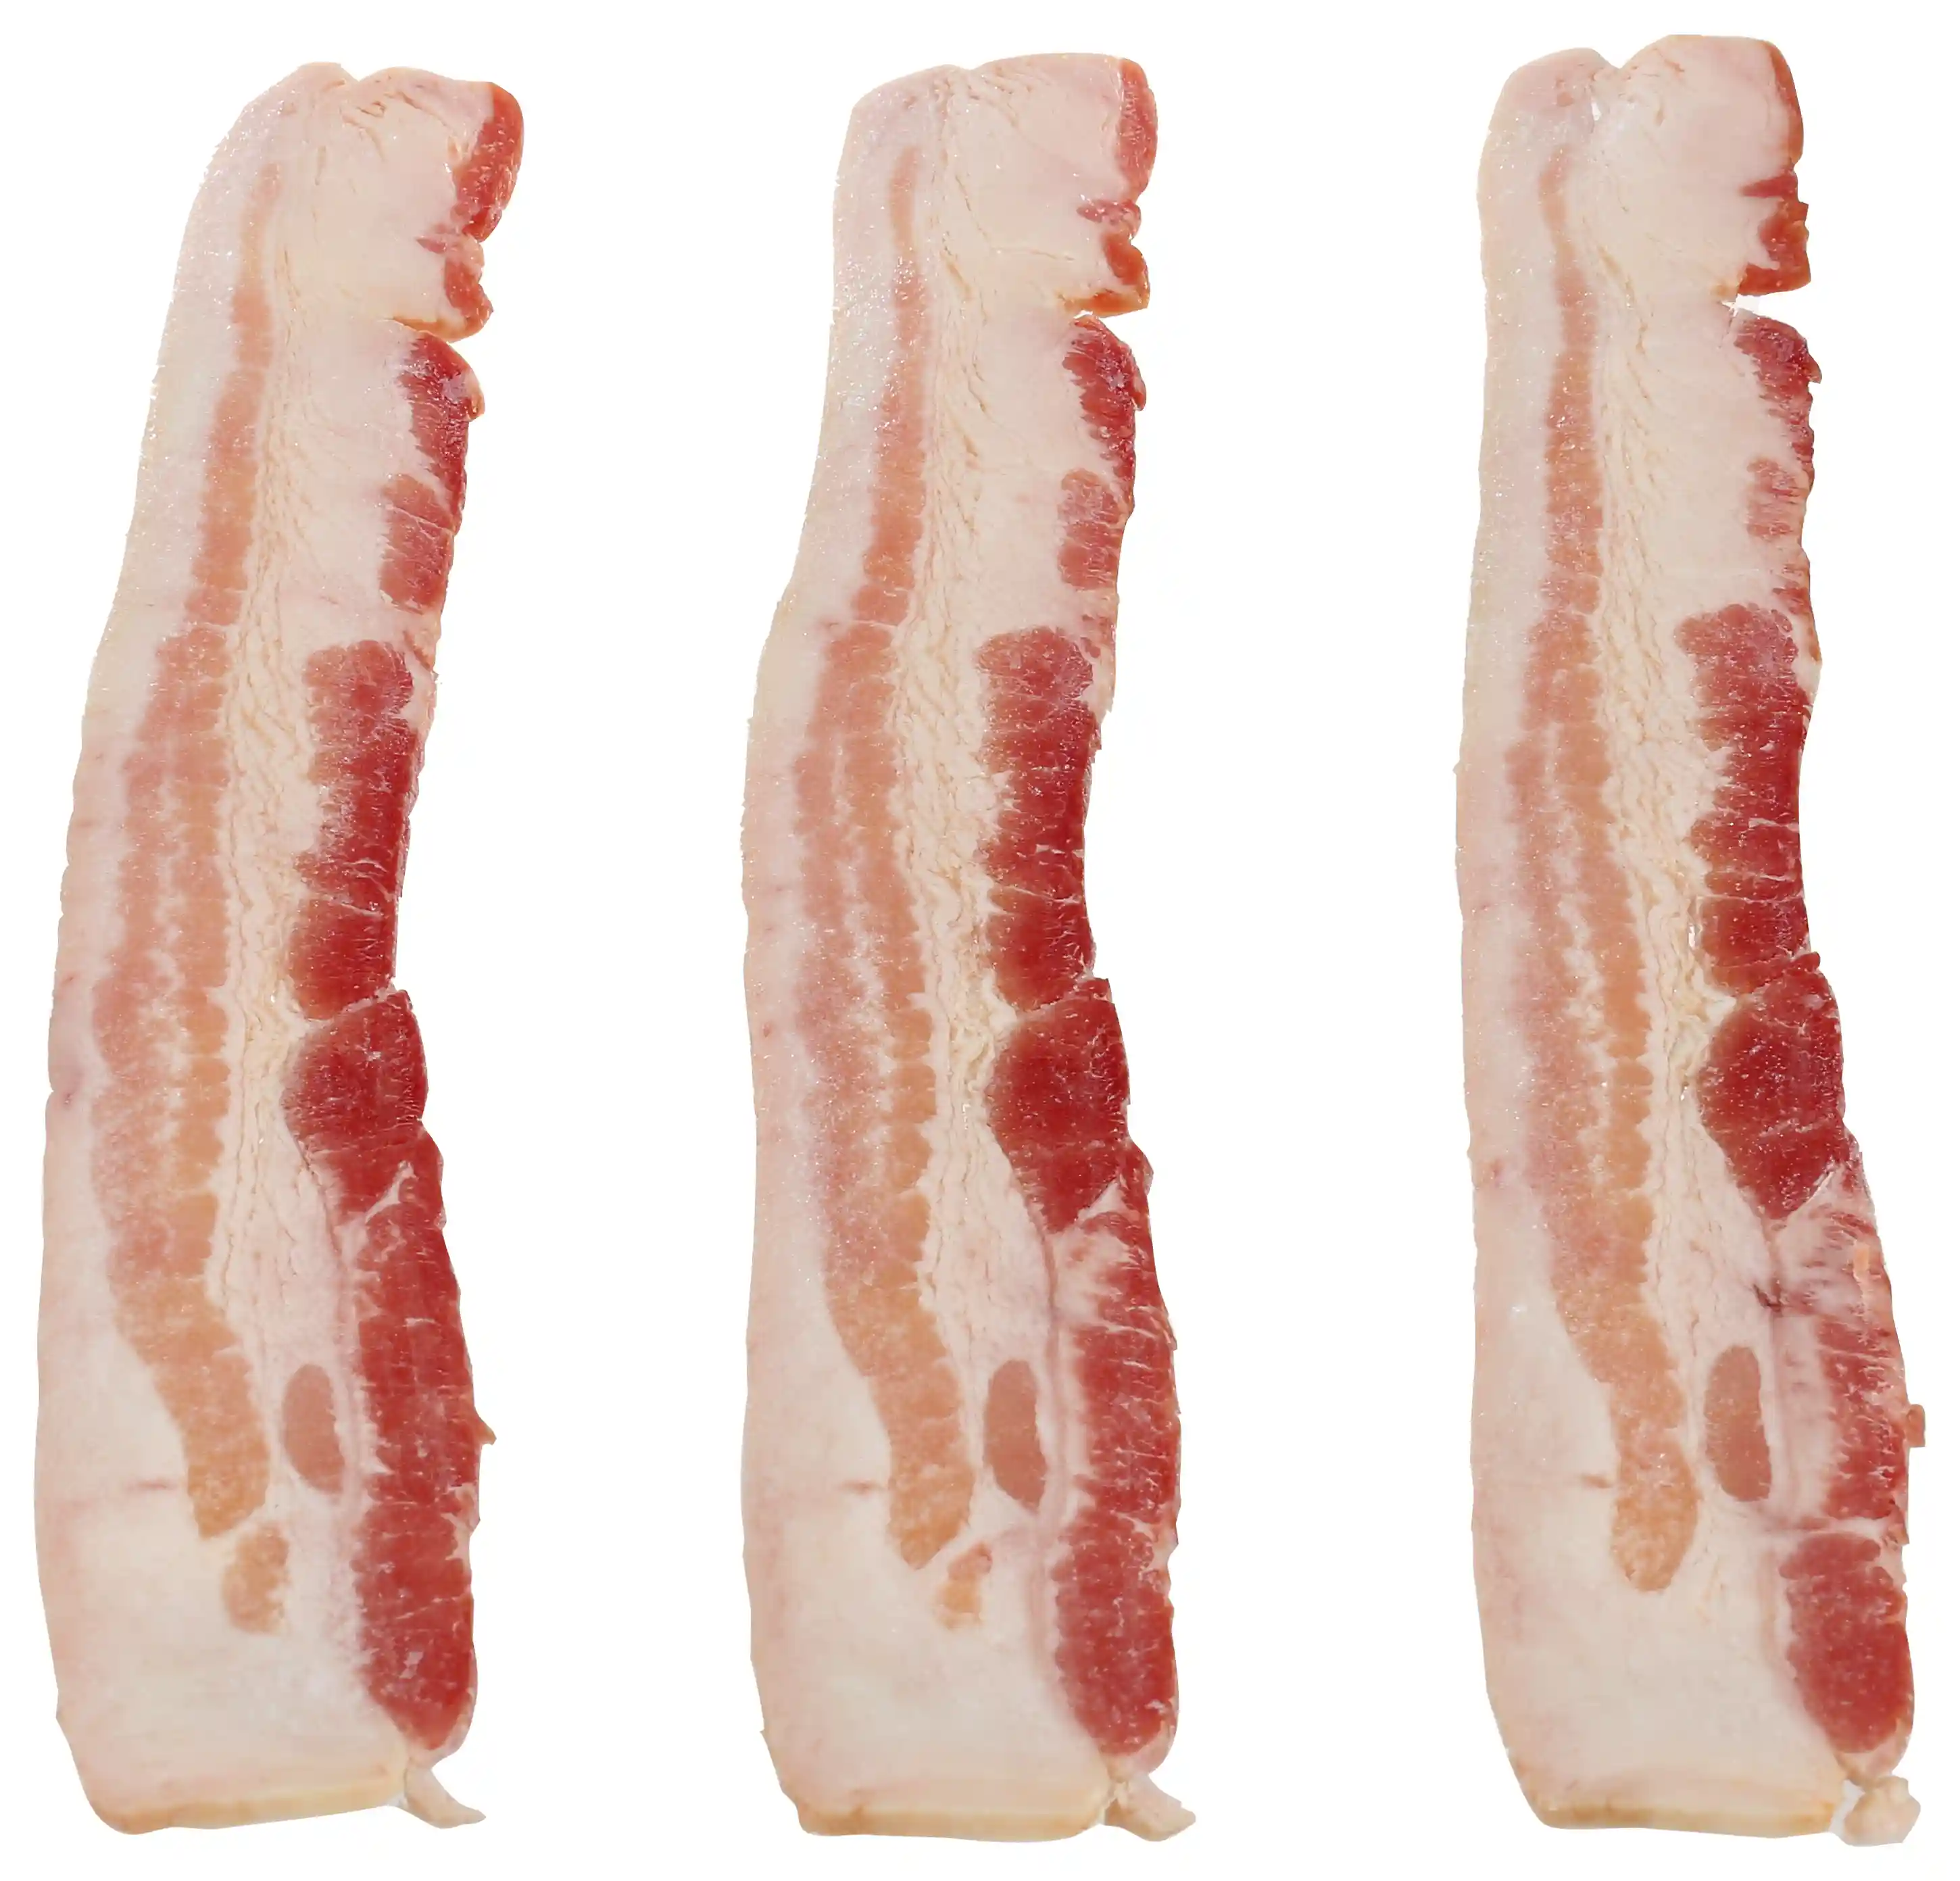 Wright® Brand Naturally Applewood Smoked Thin Sliced Bacon, Flat-Pack®, 15 Lbs, 18-22 Slices per Pound, Frozen_image_21